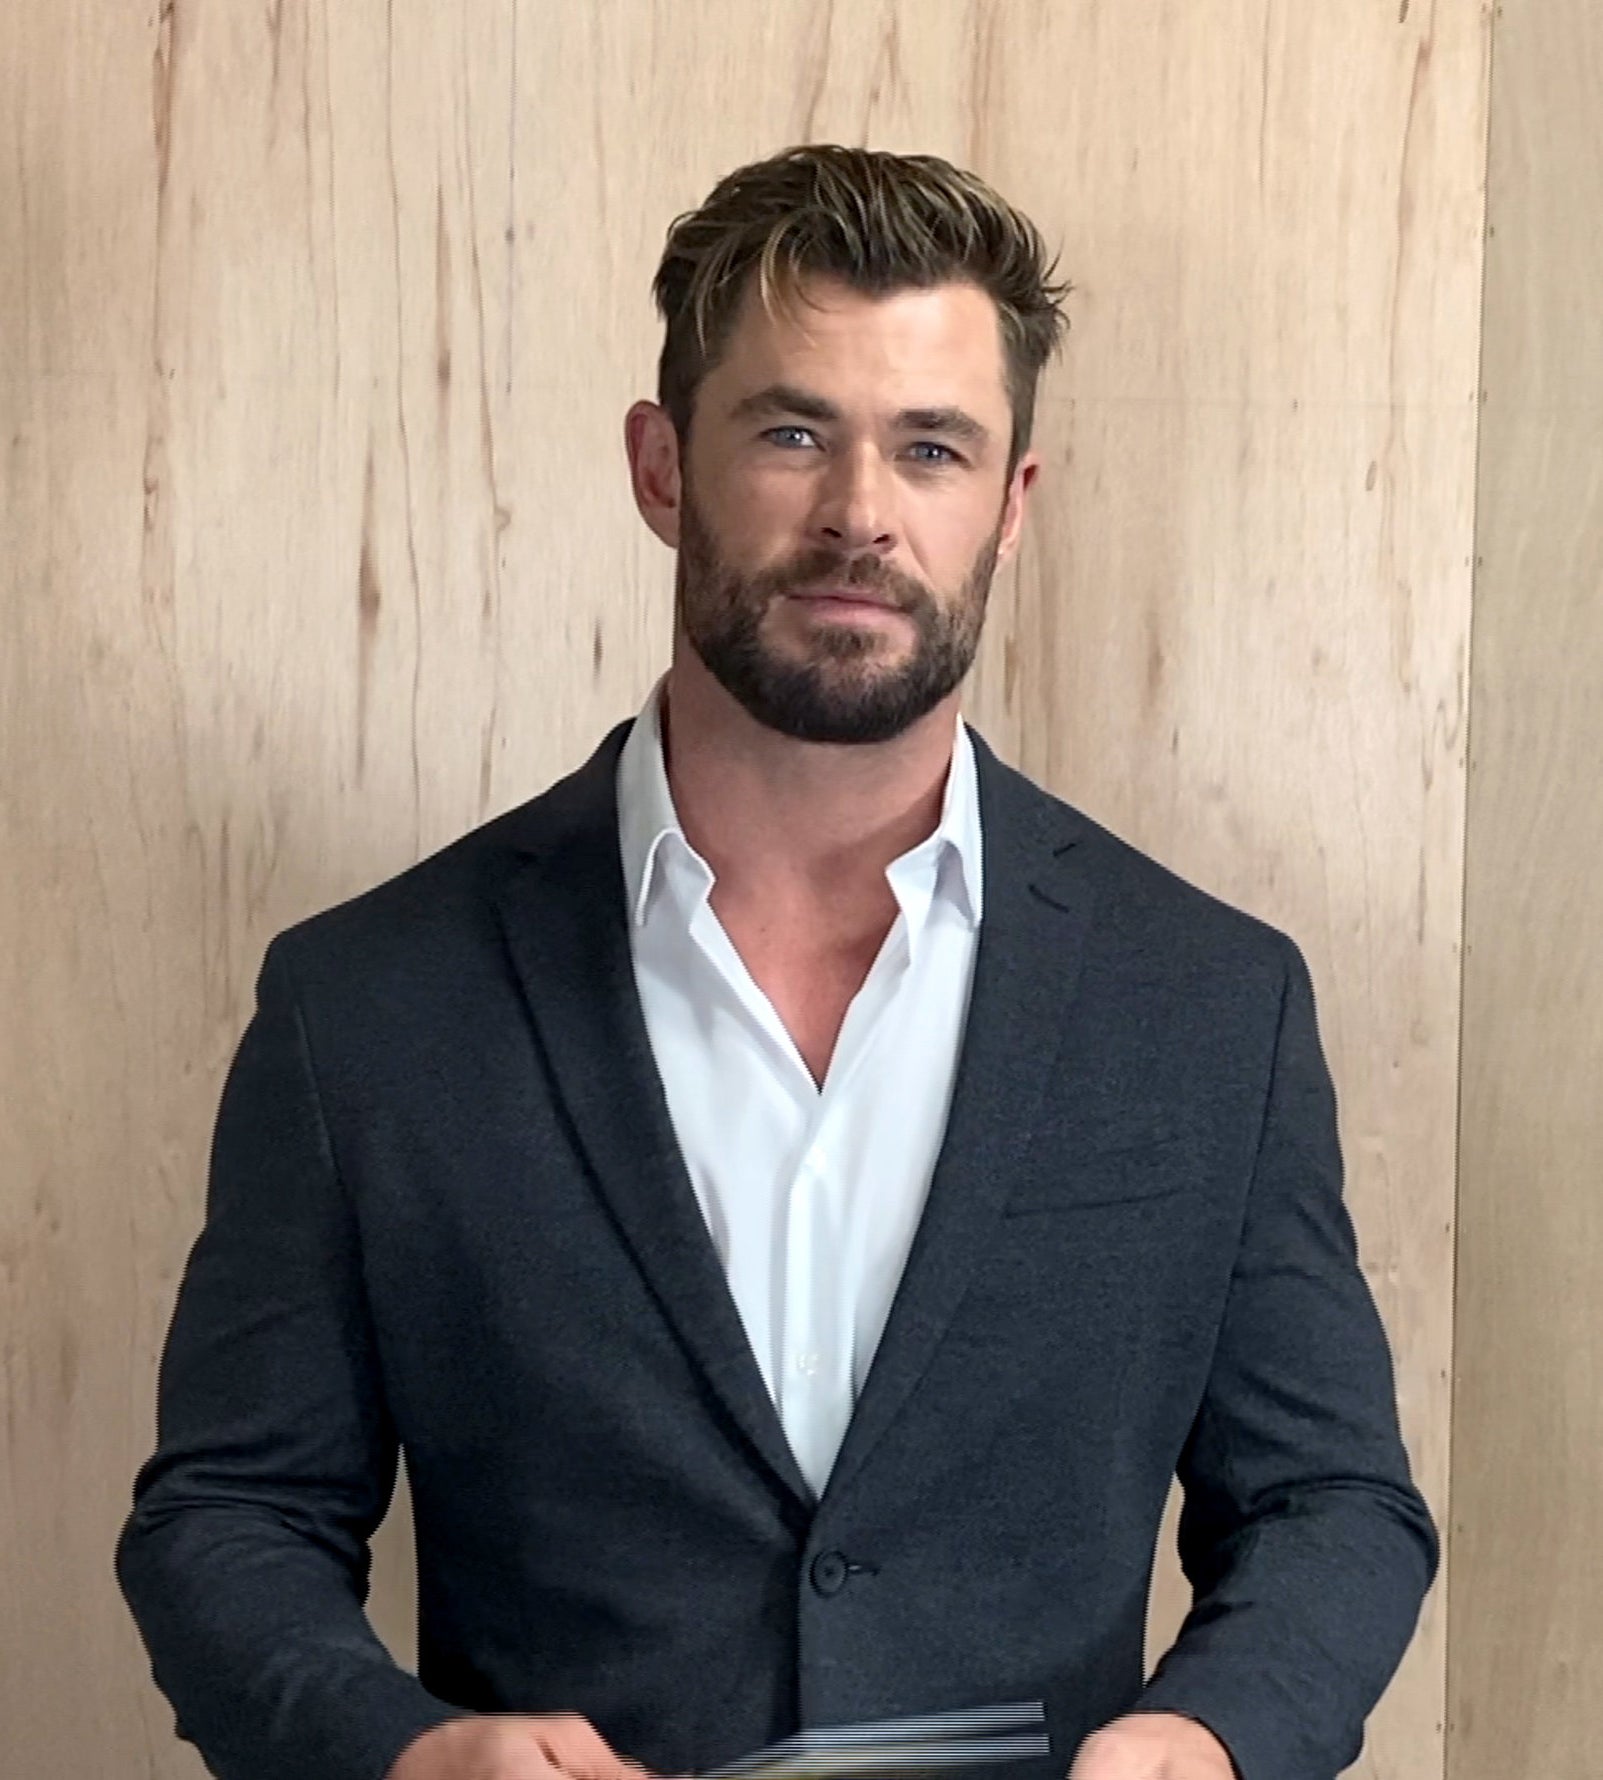 Chris Hemsworth gives a speech during the 26th Annual Critics Choice Awards in March 2021